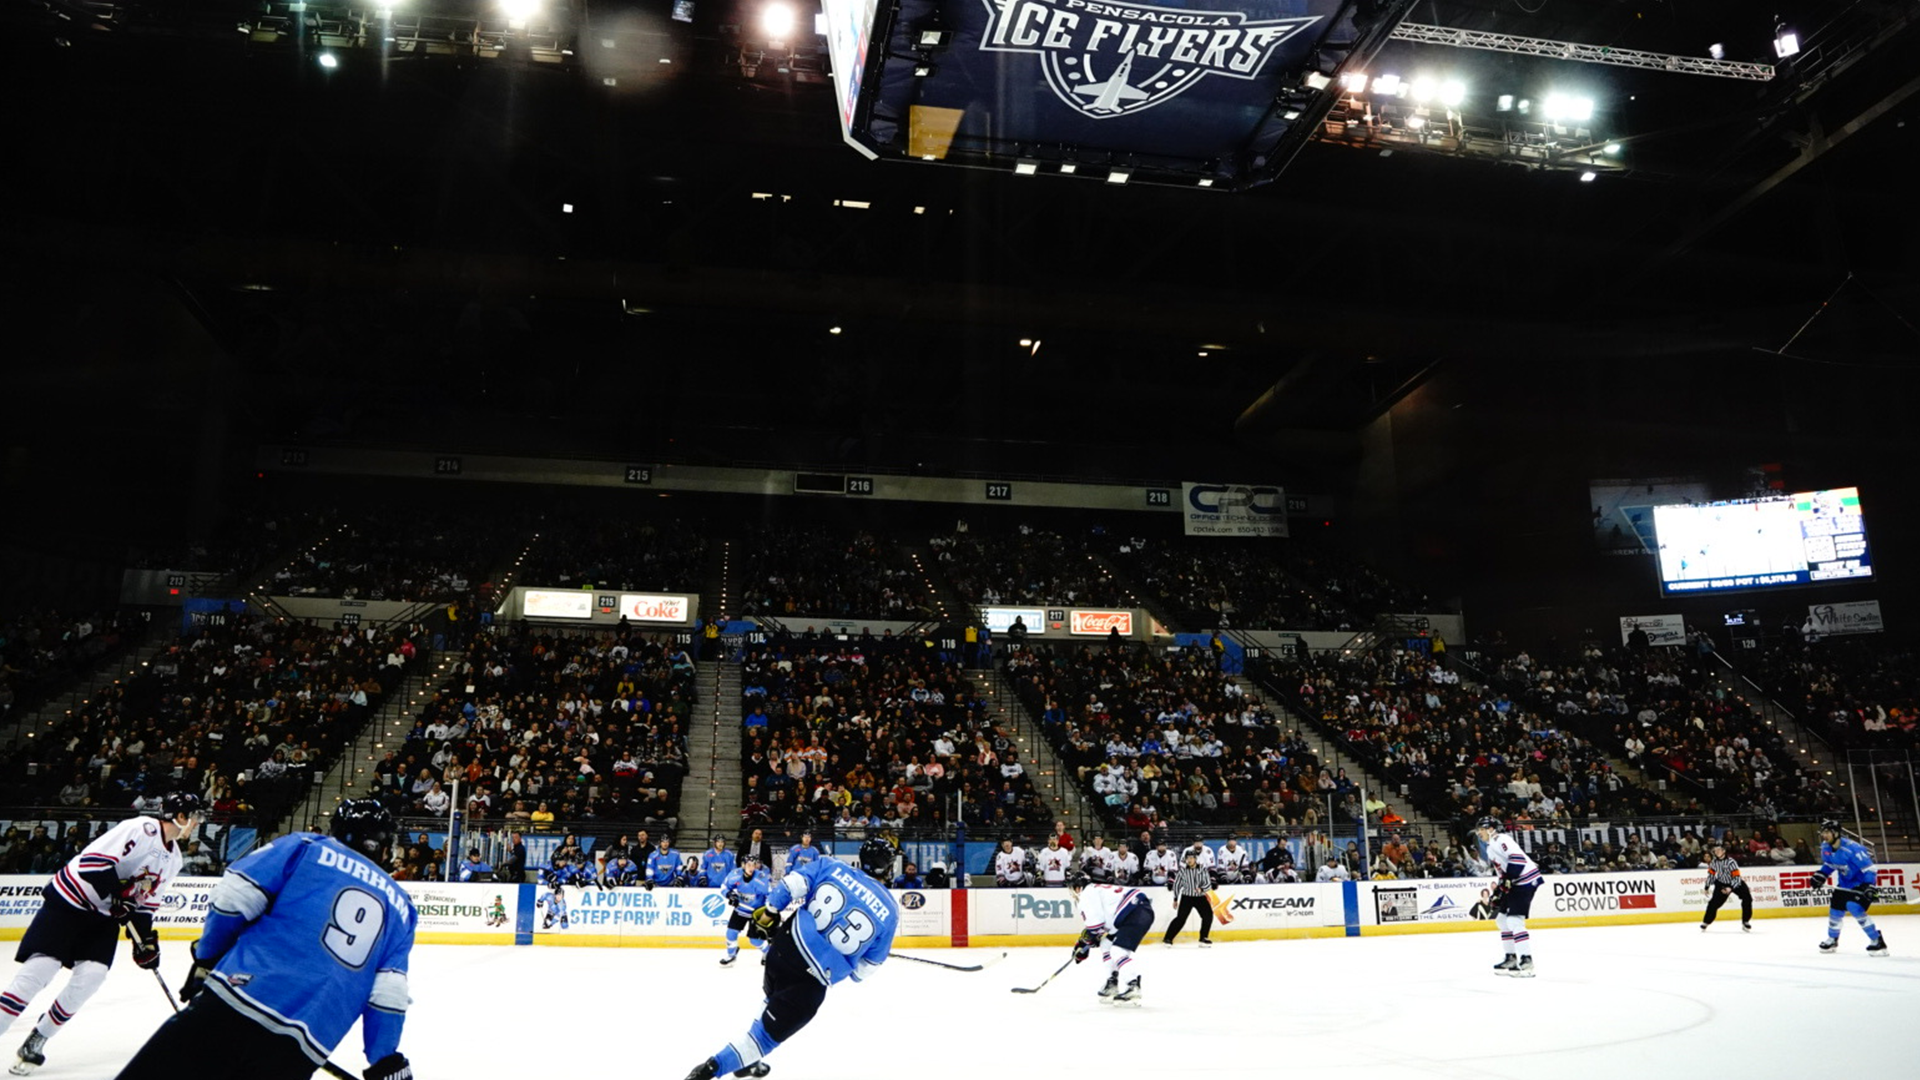 Pensacola Ice Flyers rebrand as Bushwackers as part of Rebrand Night  Promotion